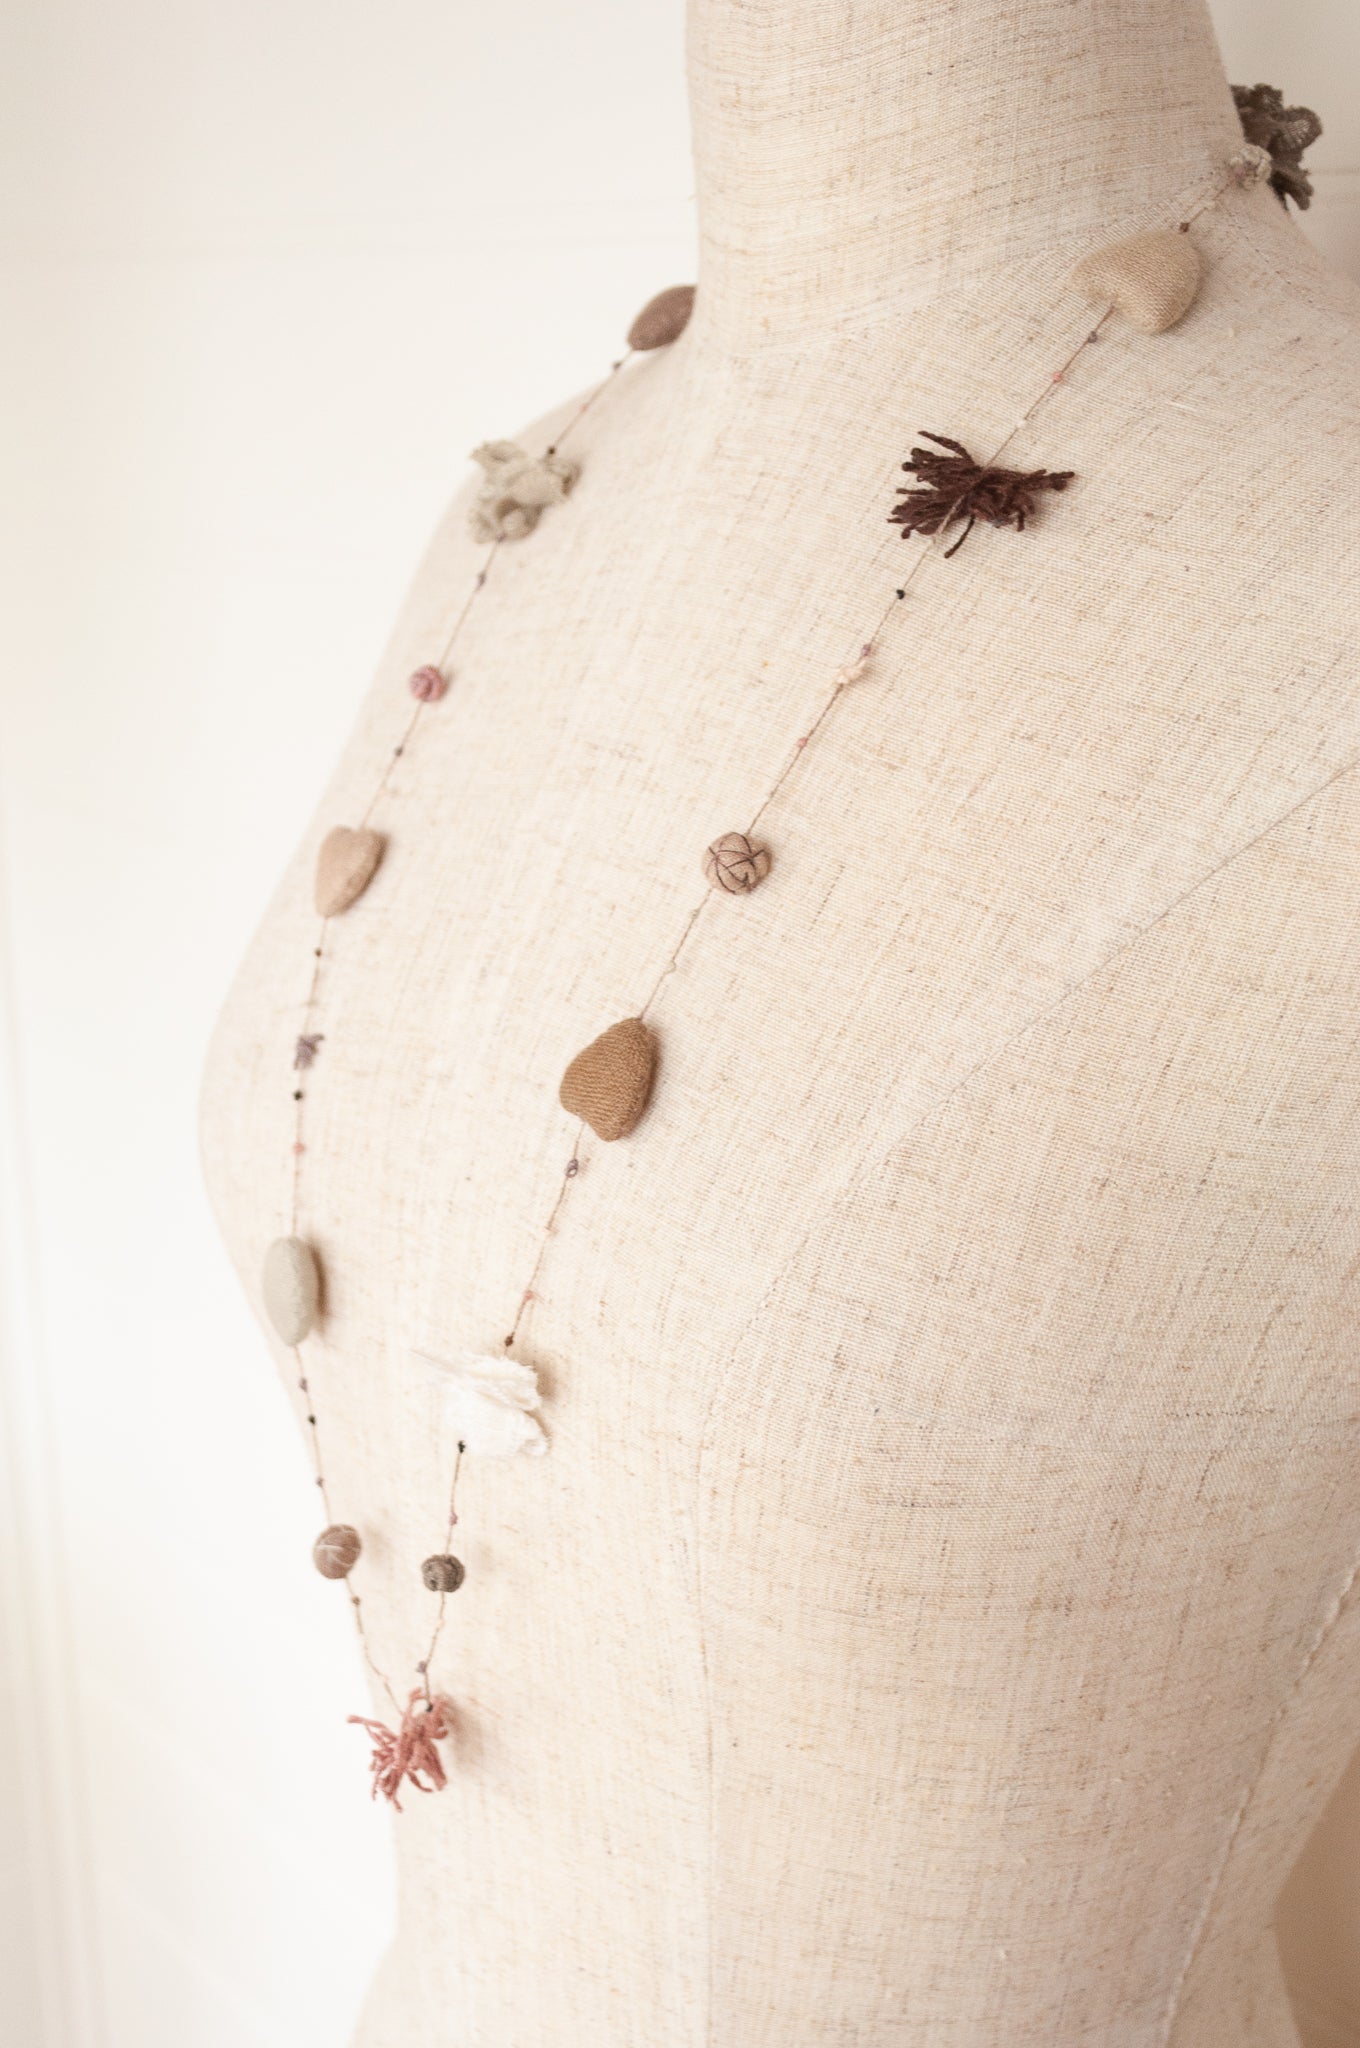 Sophie Digard hand made linen necklace, a string of hearts, flowers and beads in neutral tones.